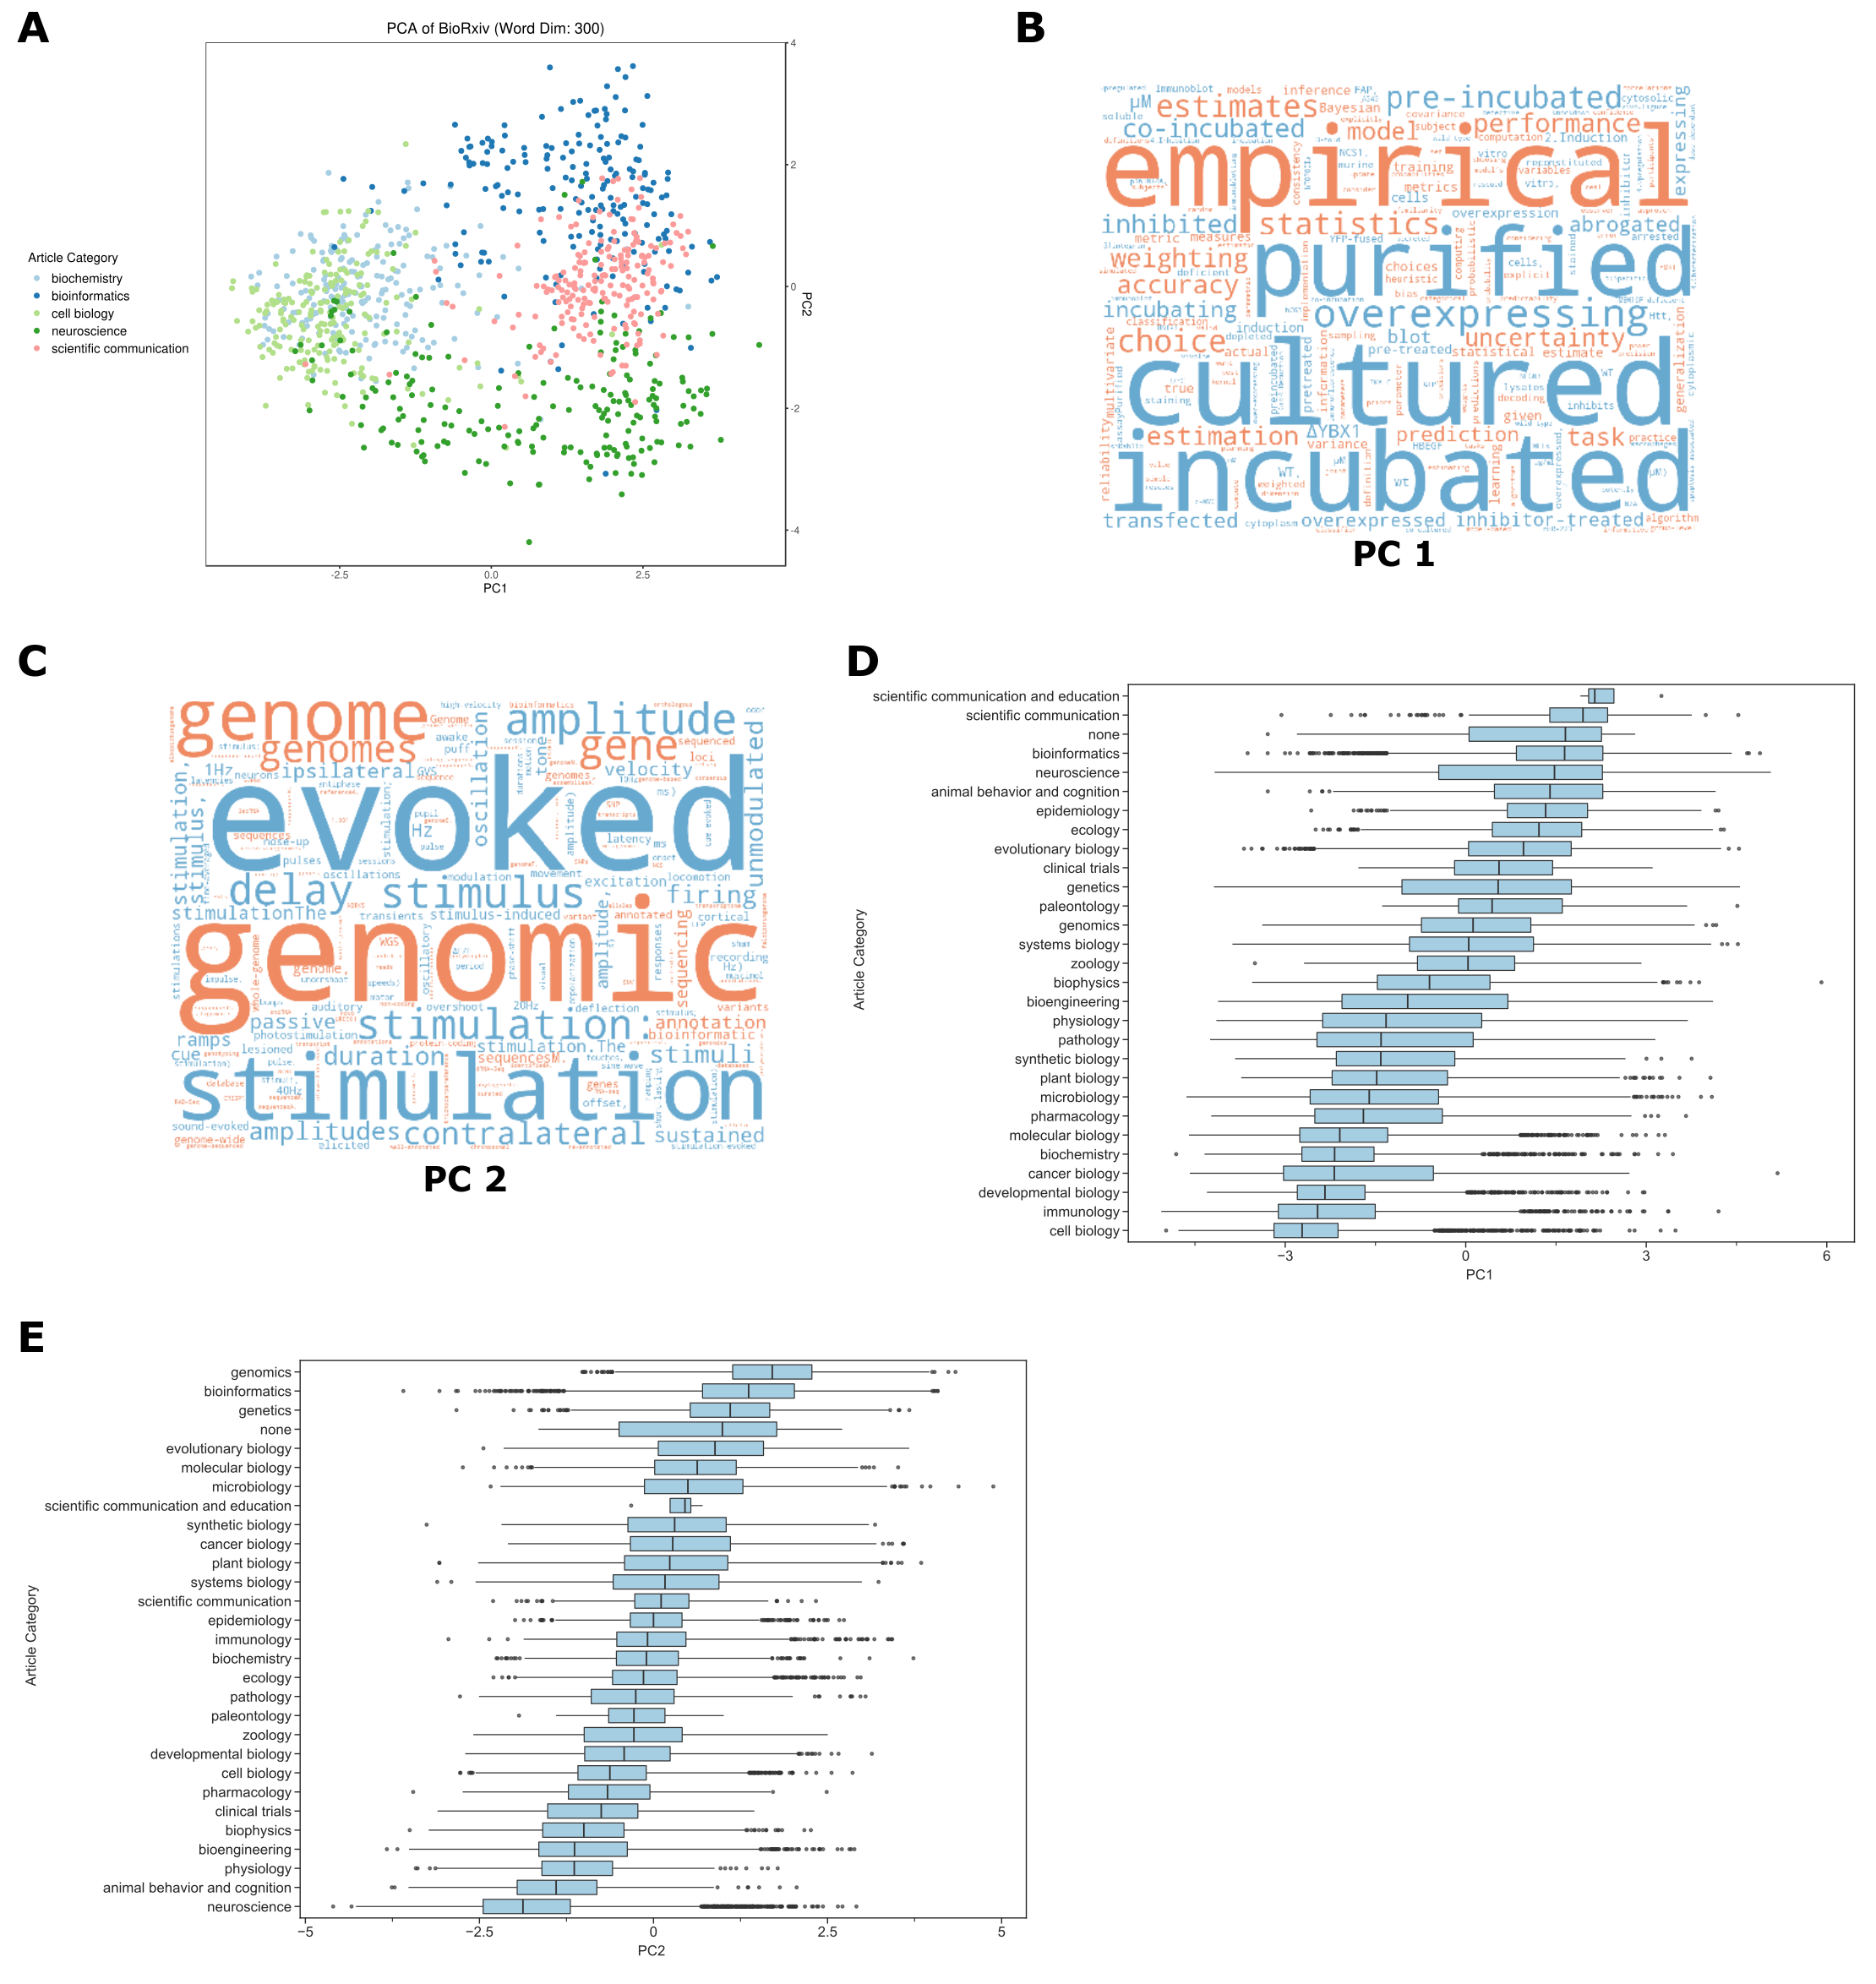 Figure S1: A. Principal components (PC) analysis of bioRxiv word2vec embeddings groups documents based on author-selected categories. We visualized documents from key categories on a scatterplot for the first two PCs. The first PC separated cell biology from informatics-related fields, and the second PC separated bioinformatics from neuroscience fields. B. A word cloud visualization of PC1. Each word cloud depicts the cosine similarity score between tokens and the first PC. Tokens in orange were most similar to the PC’s positive direction, while tokens in blue were most similar to the PC’s negative direction. The size of each token indicates the magnitude of the similarity. C. A word cloud visualization of PC2, which separated bioinformatics from neuroscience. Similar to the first PC, tokens in orange were most similar to the PC’s positive direction, while tokens in blue were most similar to the PC’s negative direction. The size of each token indicates the magnitude of the similarity. D. Examining PC1 values for each article by category created a continuum from informatics-related fields on the top through cell biology on the bottom. Specific article categories (neuroscience, genetics) were spread throughout PC1 values. E. Examining PC2 values for each article by category revealed fields like genomics, bioinformatics, and genetics on the top and neuroscience and behavior on the bottom. Data for the information depicted in this figure are available at https://github.com/greenelab/annorxiver/blob/master/FIGURE_DATA_SOURCE.md#figure-s1.